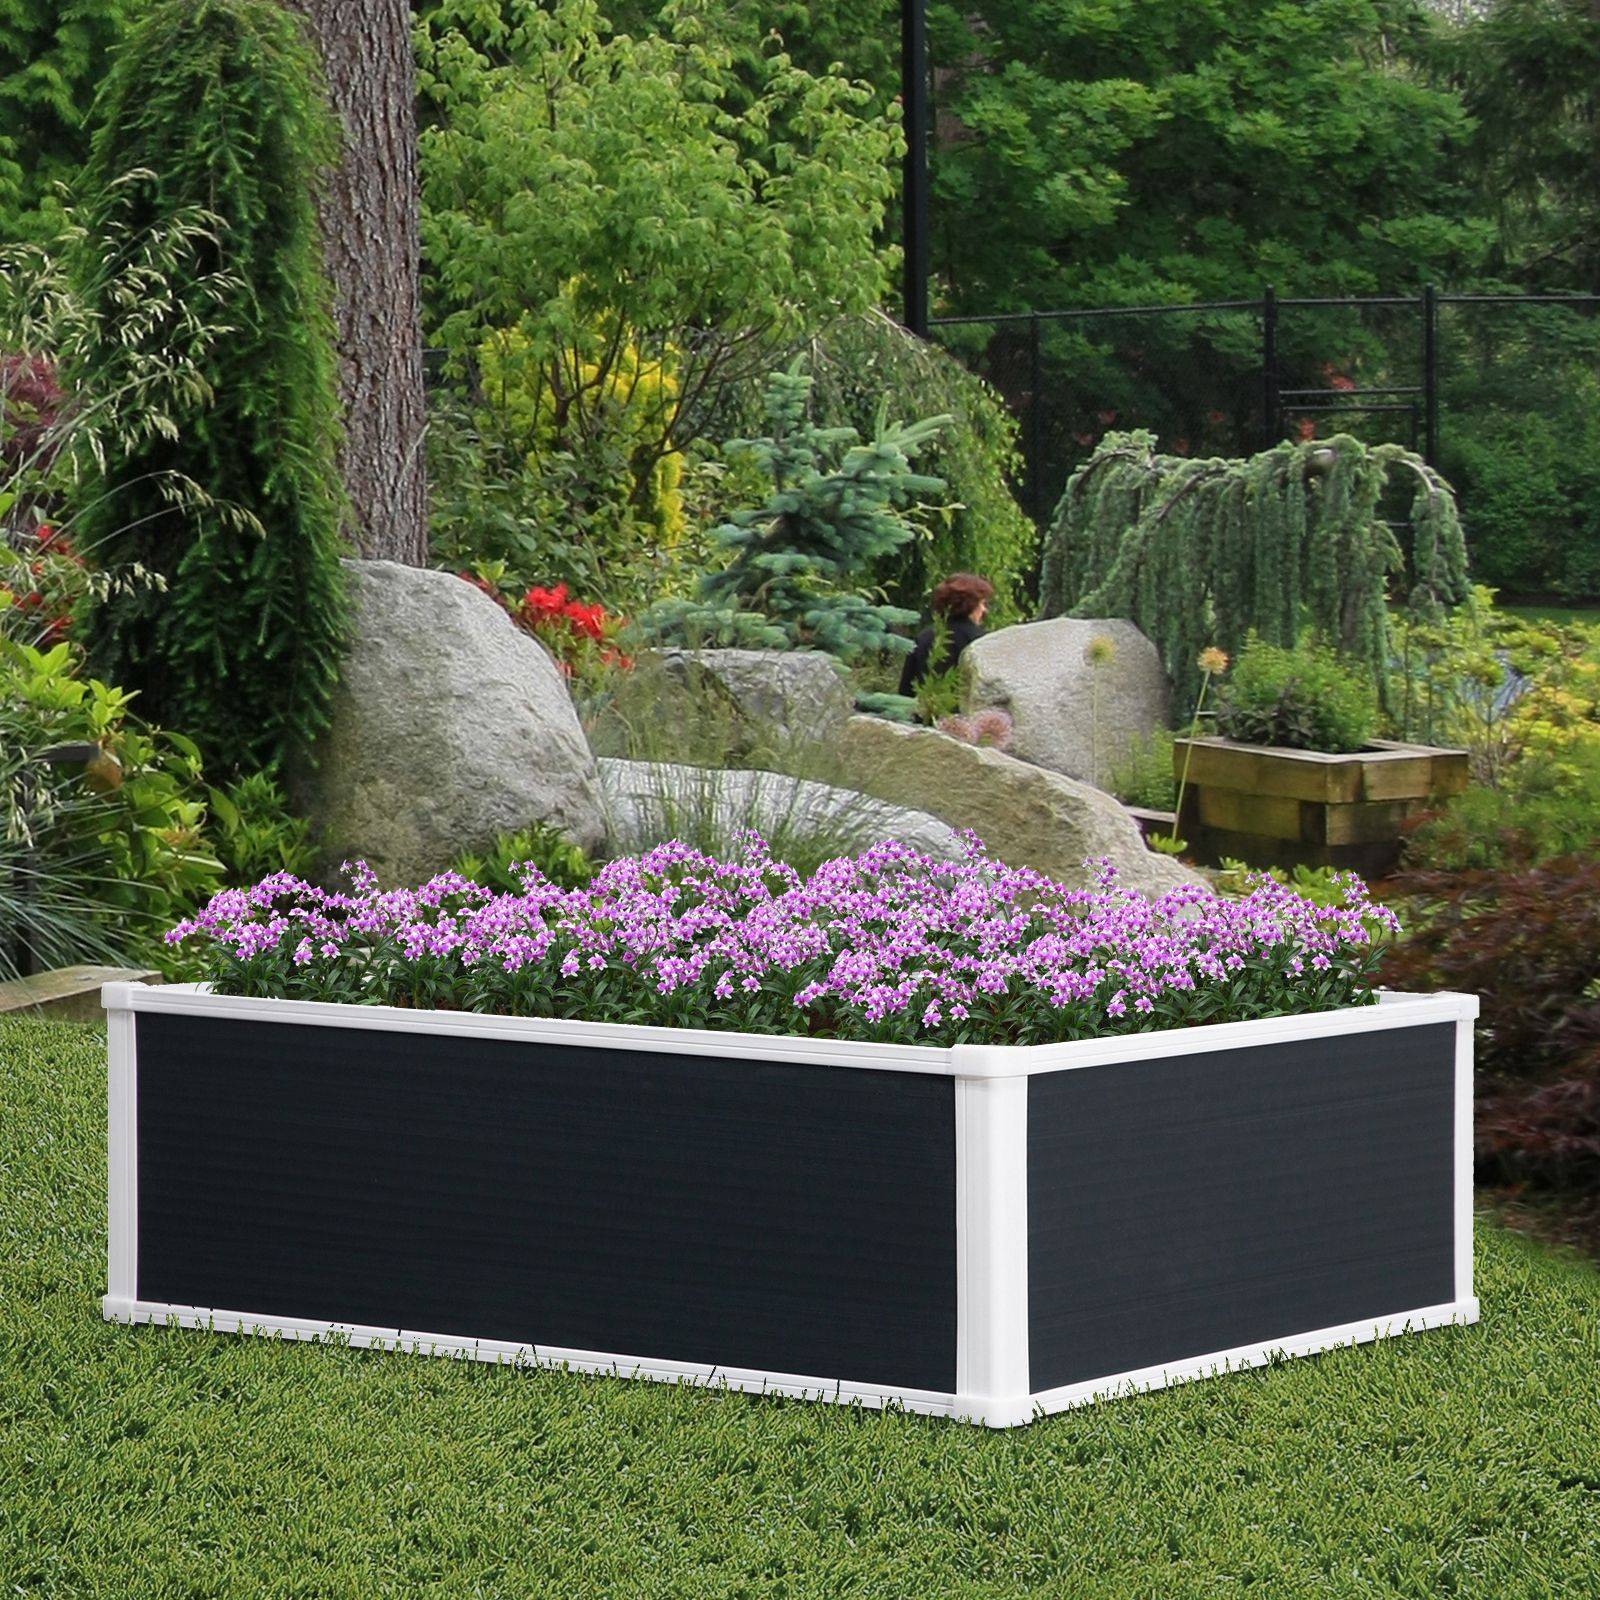 Ibc Wicking Bed Design